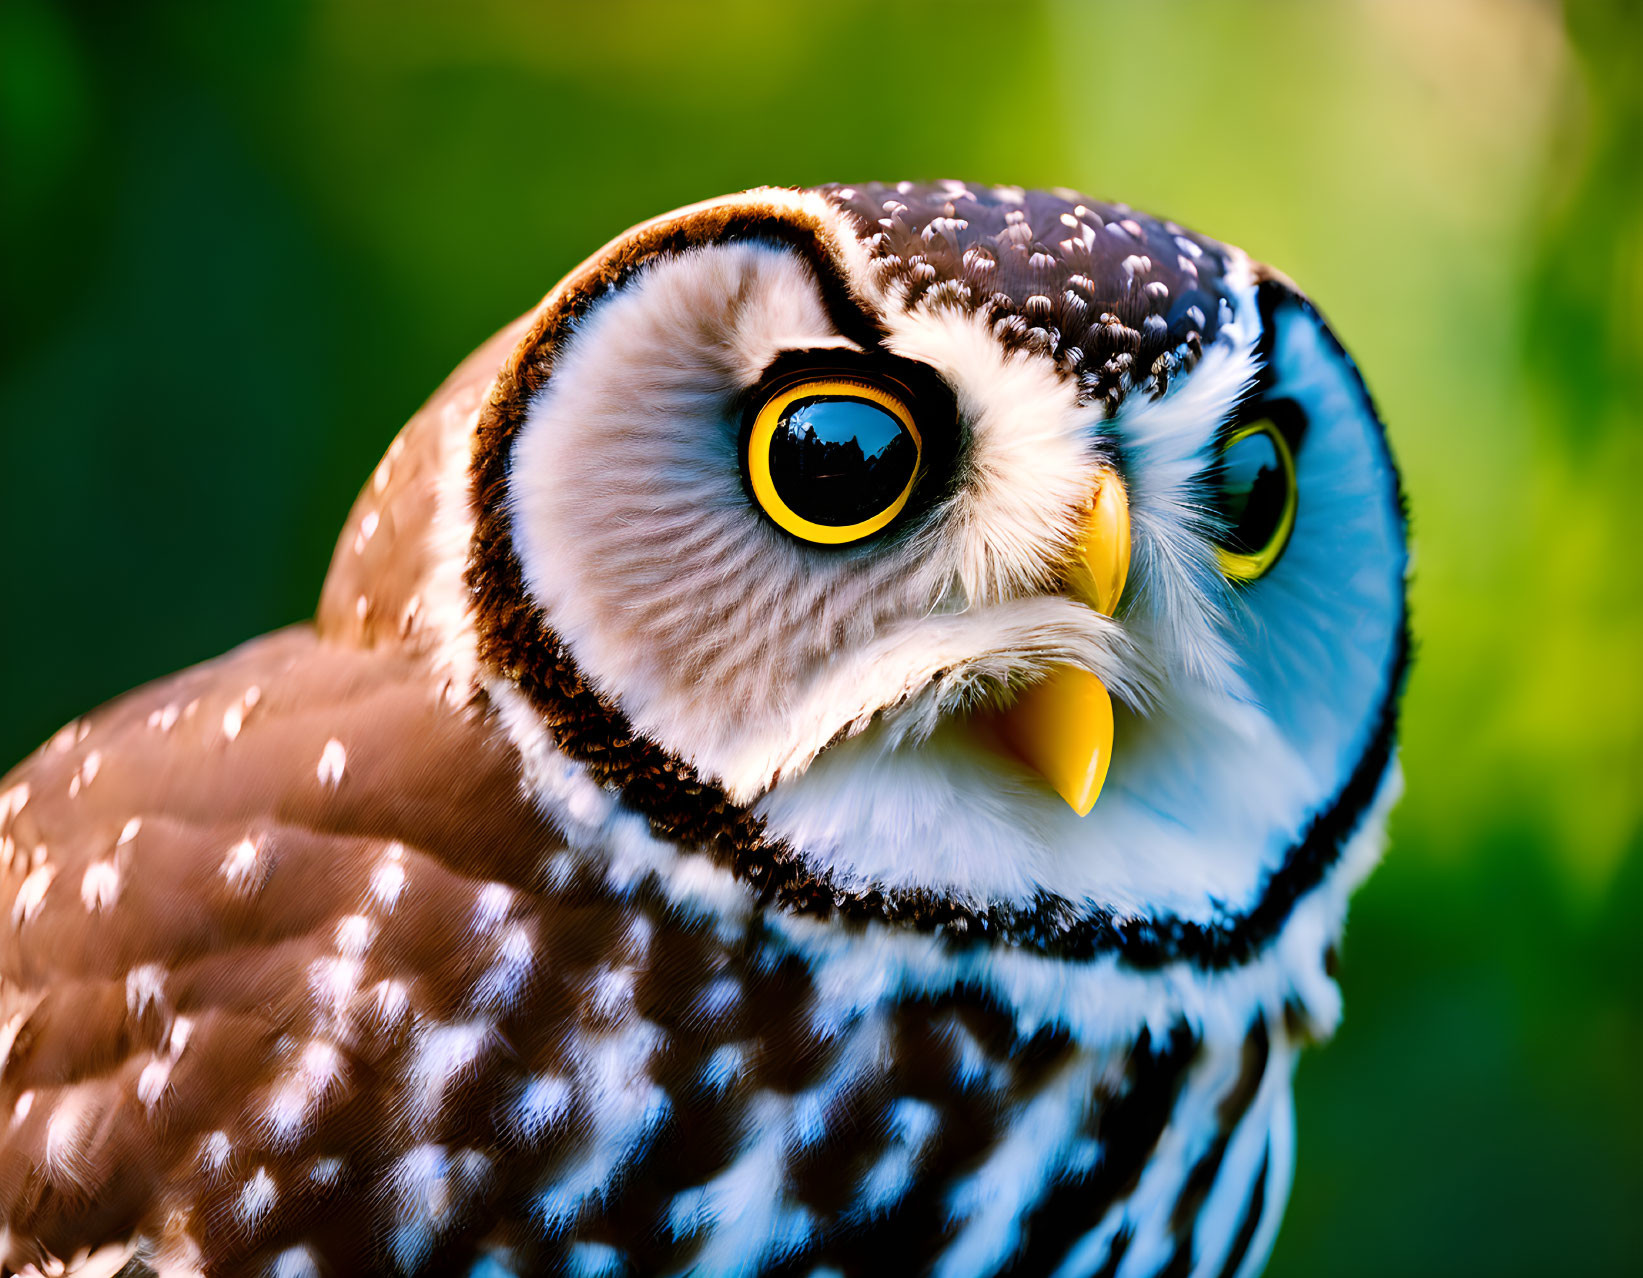 Spotted owl with captivating yellow eyes and sharp beak on green background